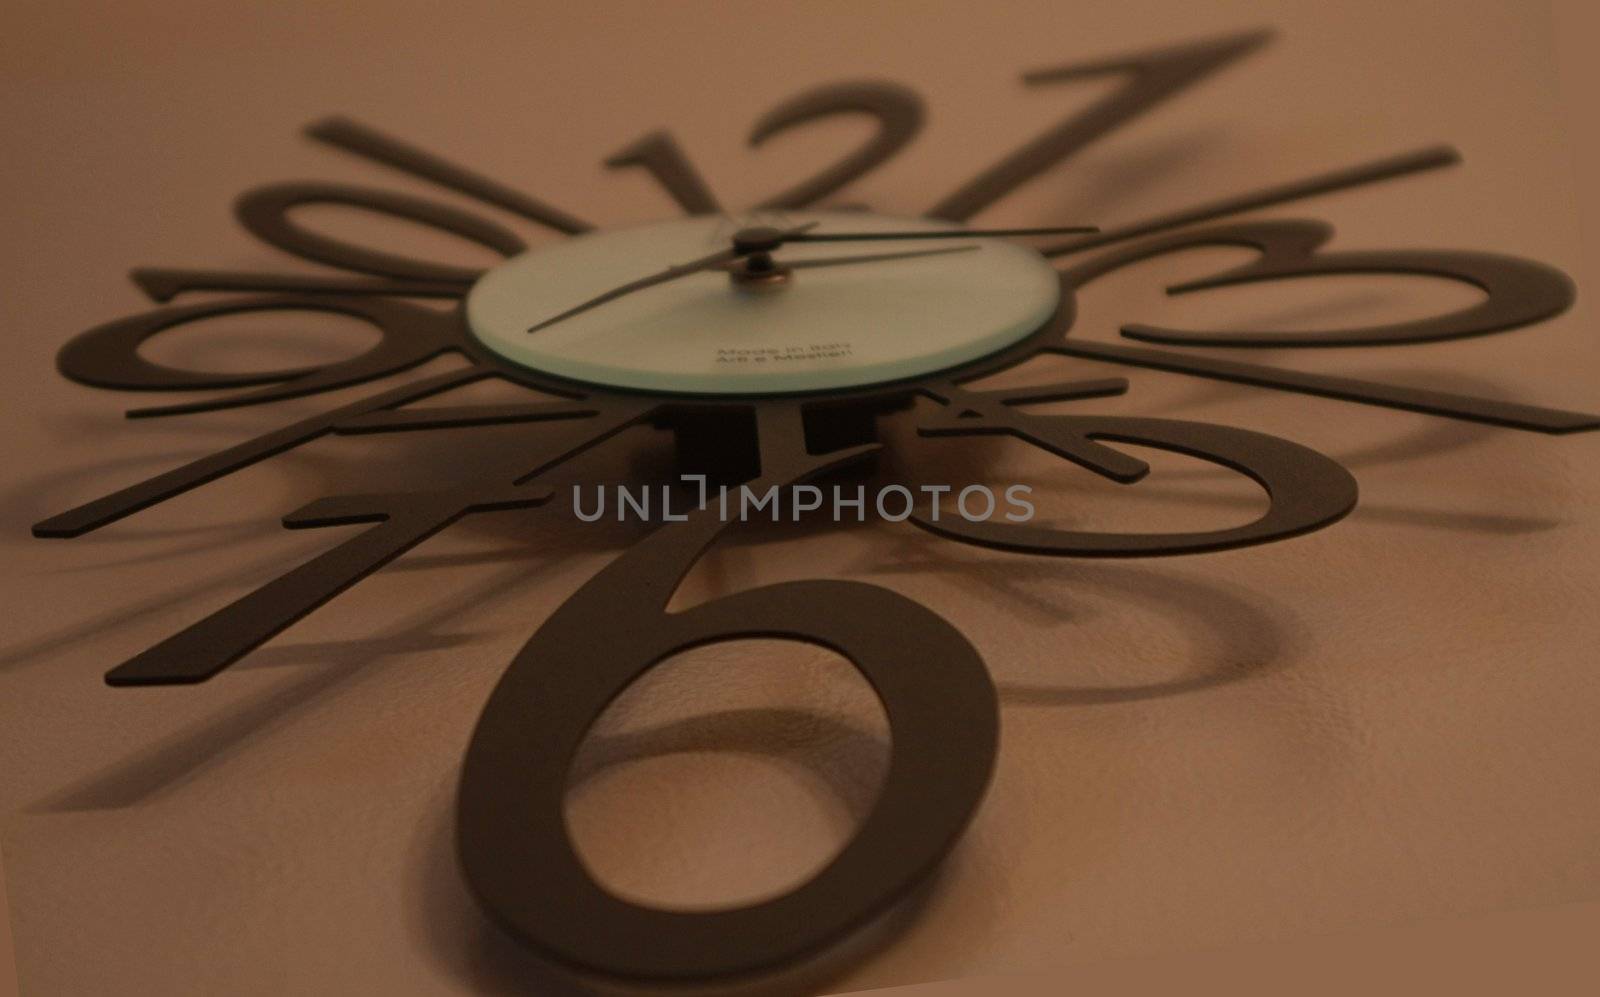 Large abstract wall clock with modern black numbers and hands. Clock is resting against a tan background.